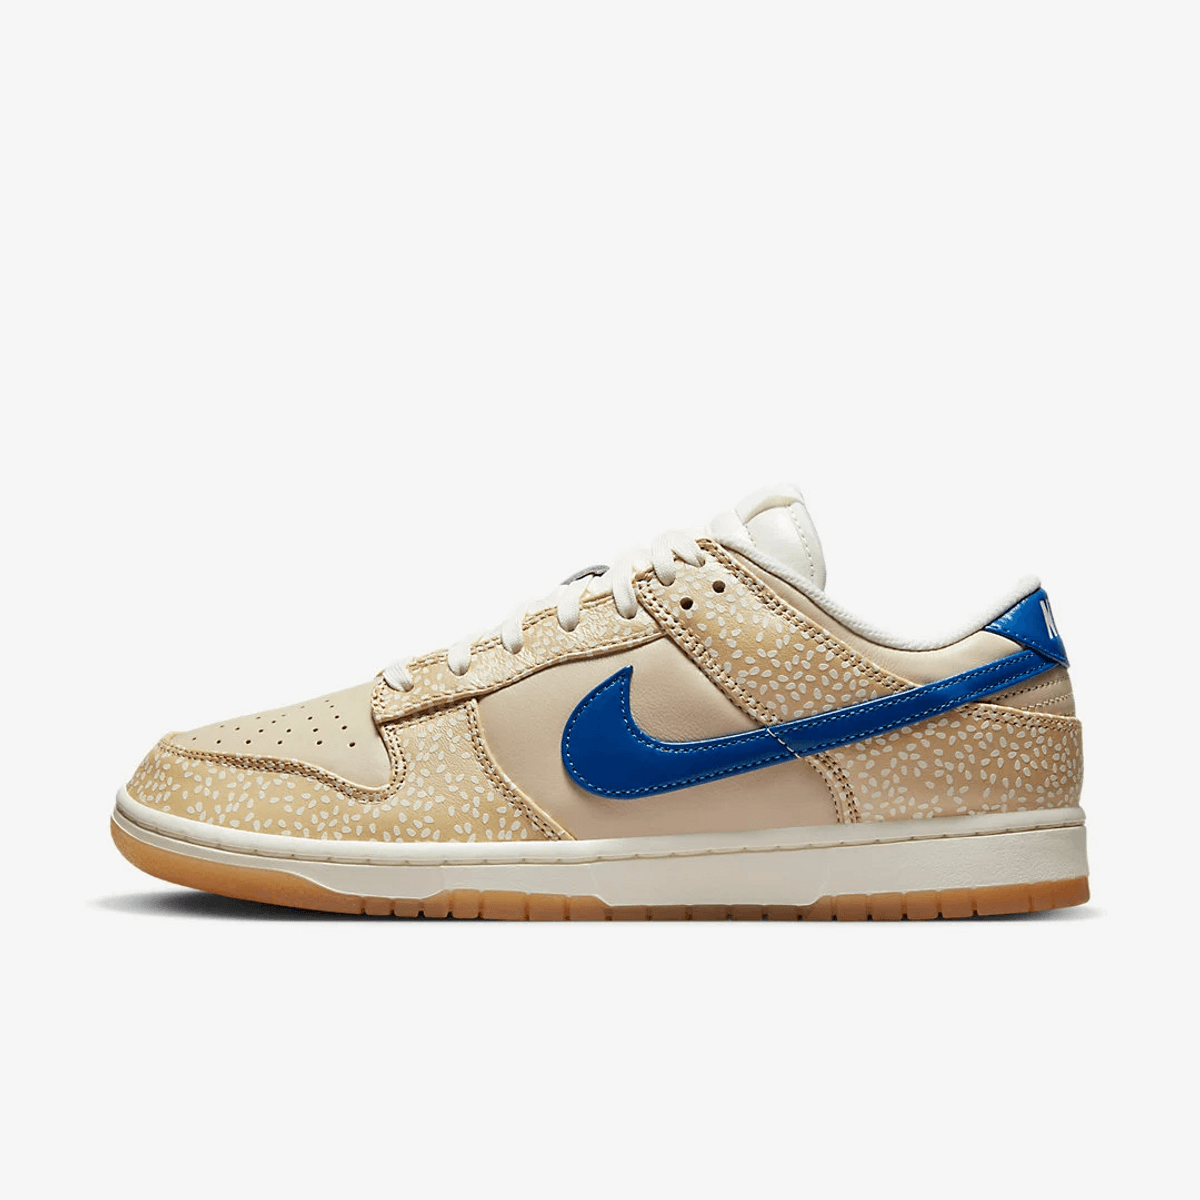 The Nike Dunk Low Montreal Bagel Pays Tribute To A Breakfast Favorite